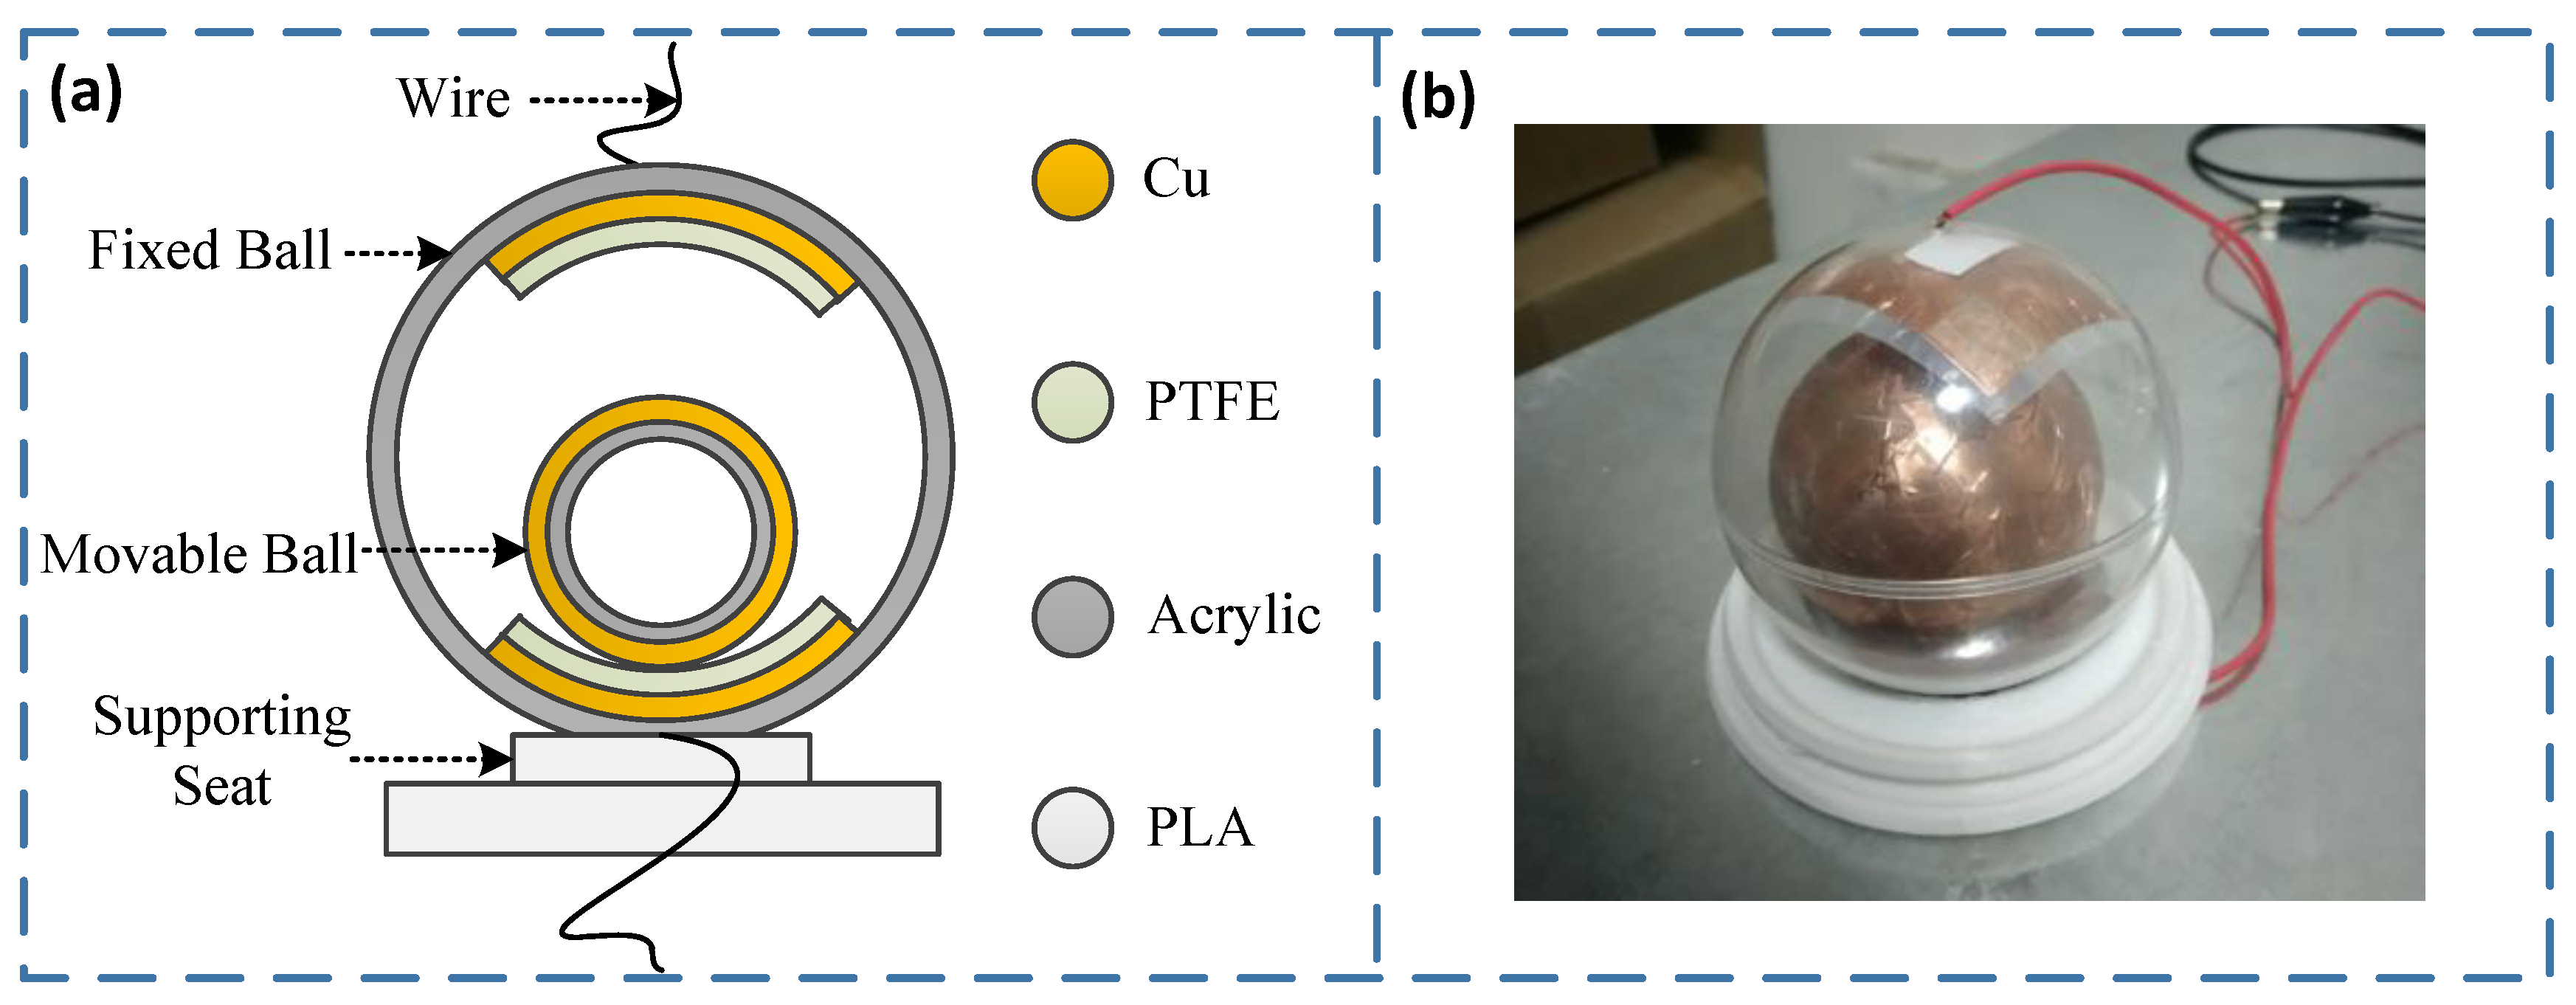 Sensors | Free Full-Text | Research on the Potential of Spherical  Triboelectric Nanogenerator for Collecting Vibration Energy and Measuring  Vibration | HTML